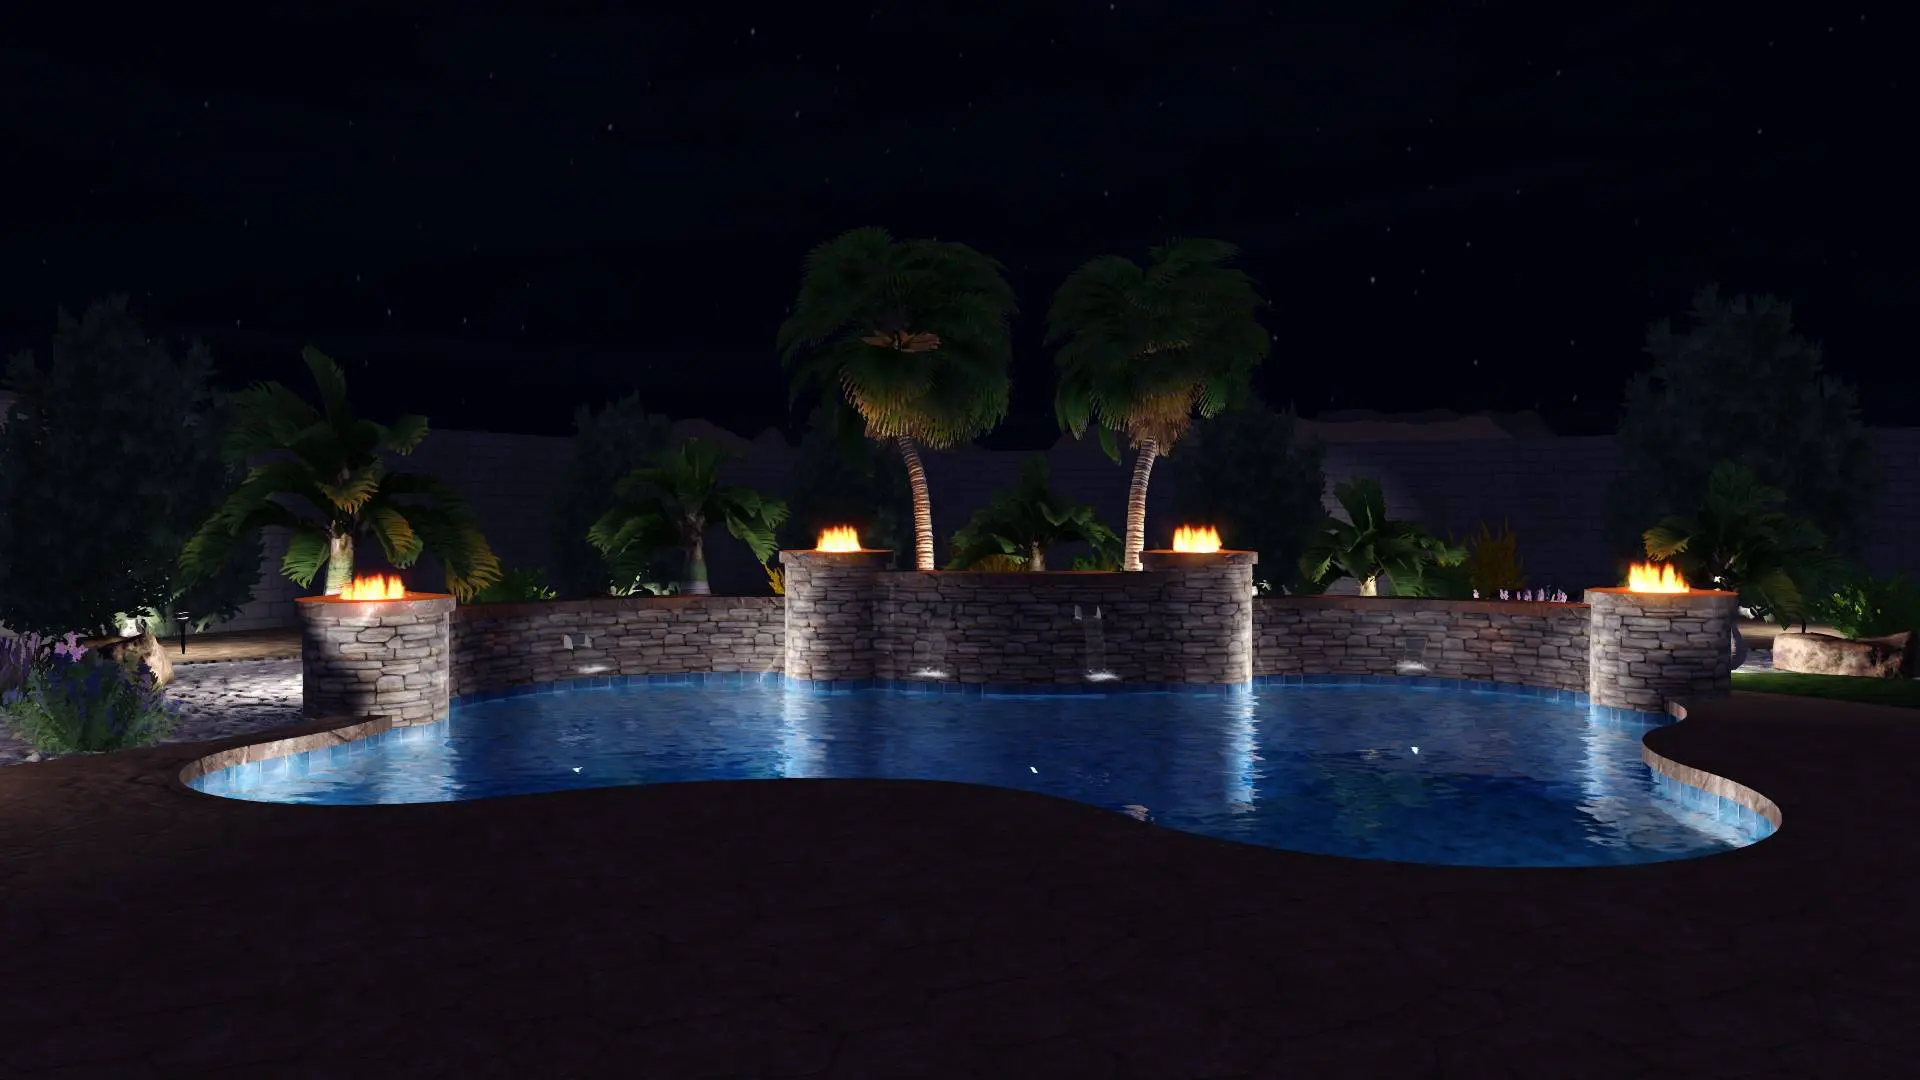 A pool with palm trees and lights at night.